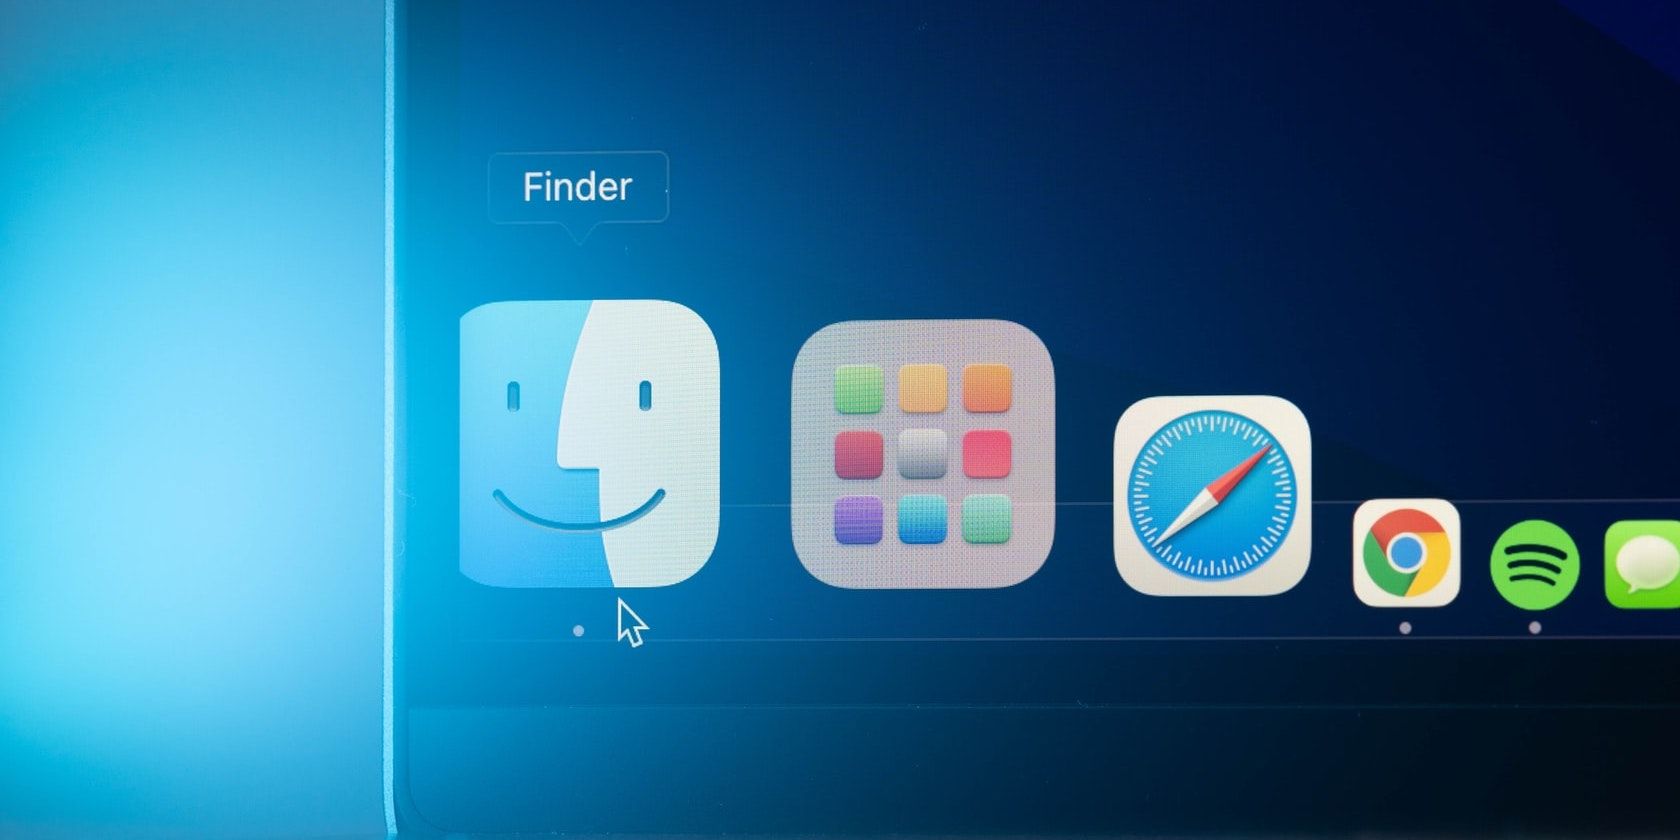 Mouse pointer over the Finder icon in Mac's Dock